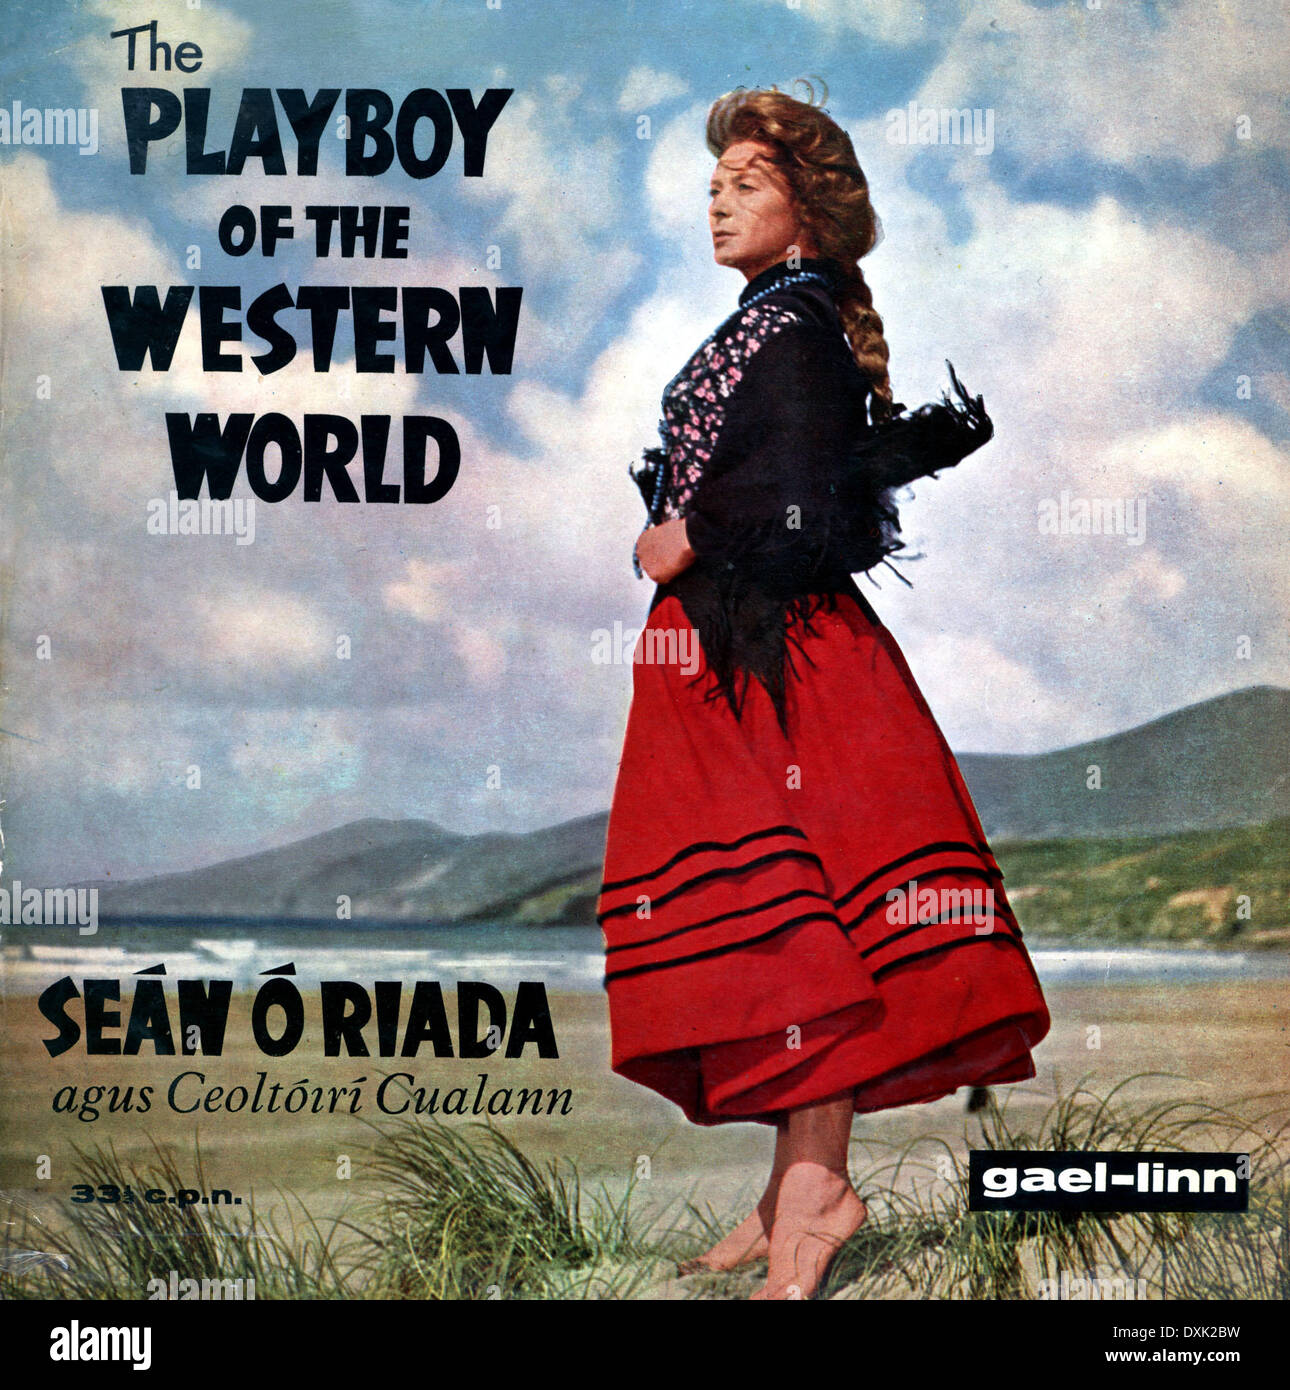 Le Playboy OF THE WESTERN WORLD (EIRE) 1962 SOUNDTRACK COVE Banque D'Images